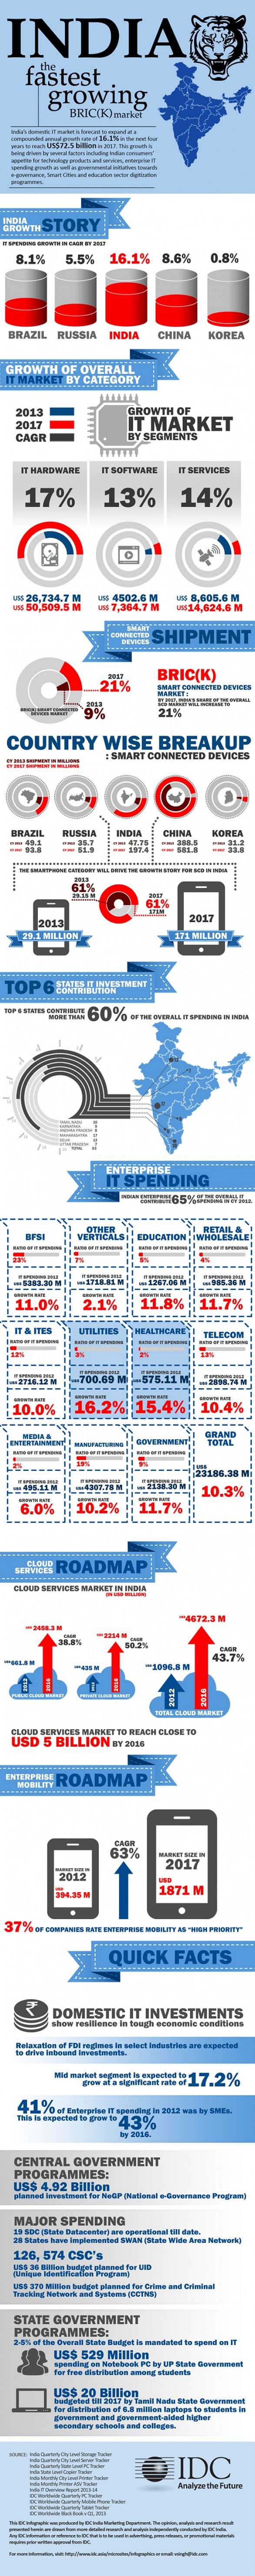 idc-indian-it-market-report-infographic